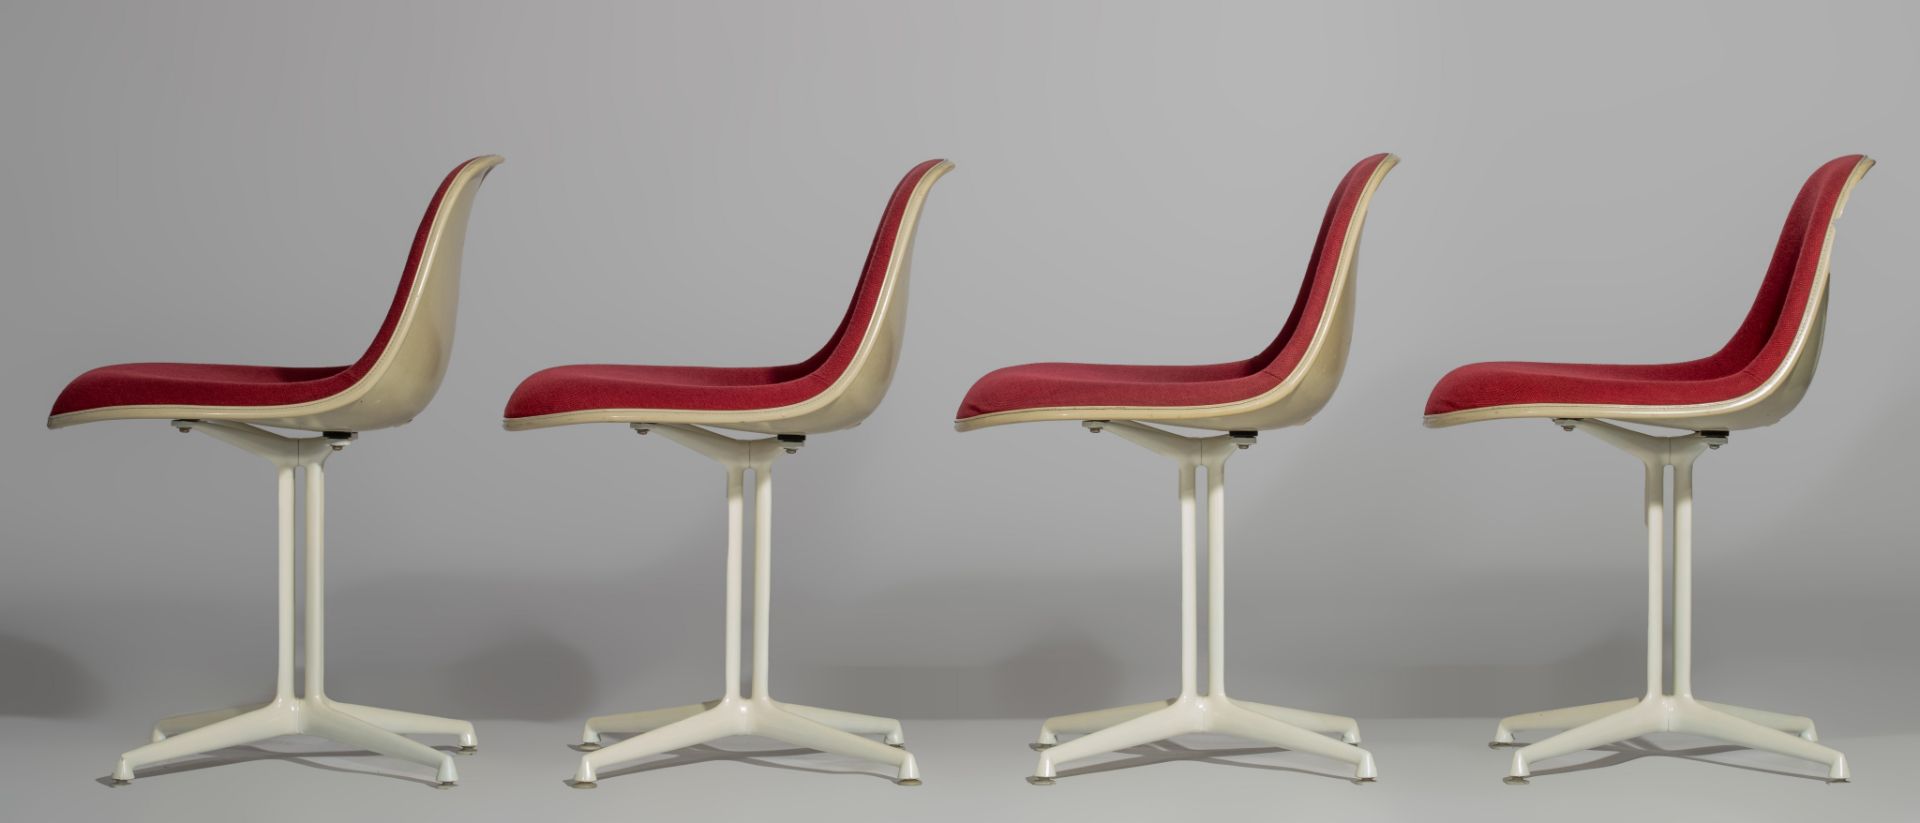 An exceptional set of 4 Eames fibreglass DSL chairs for Vitra, H 71 - W 48 cm - Image 3 of 9